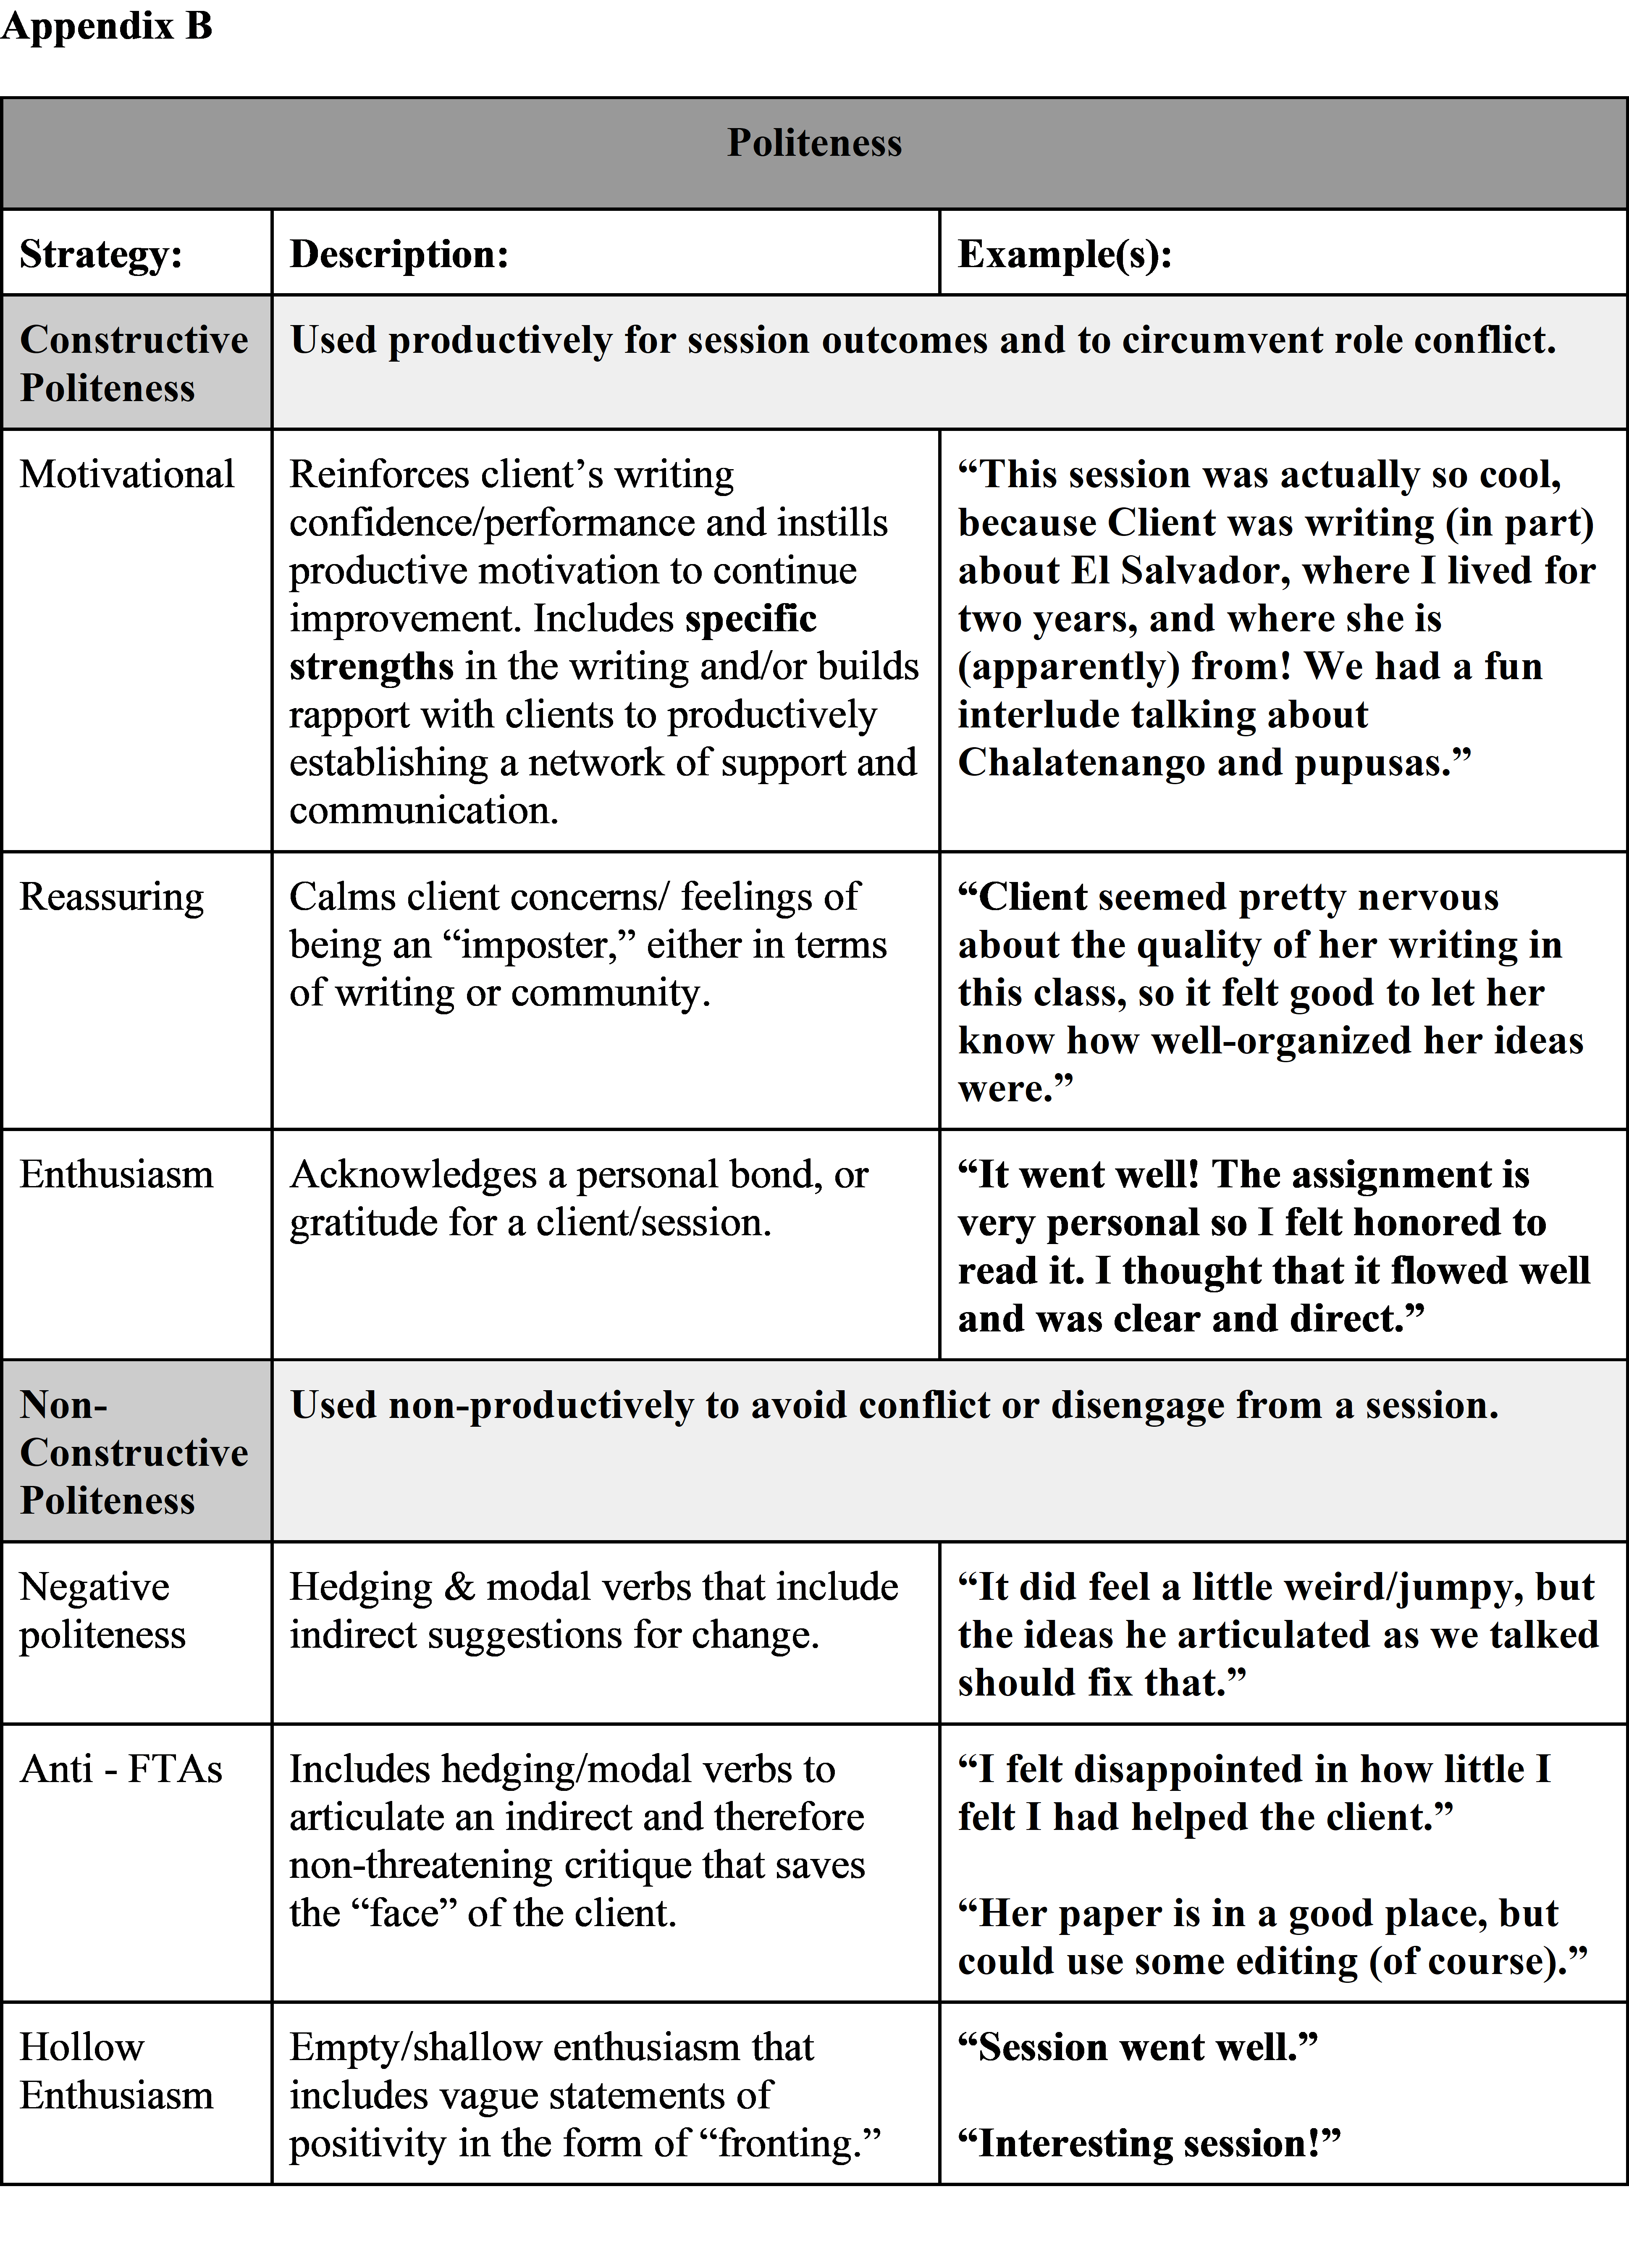 Appendix B, table showing politeness strategies, descriptions and examples including, constructive politeness (motivational, reassuring, enthusiasm); non-constructive (negative politeness, anti-face threatening acts, holly enthusiasm) and mixed politeness like the compliment sandwich which includes both constructive and non-constructive politeness rhetorical strategies. 